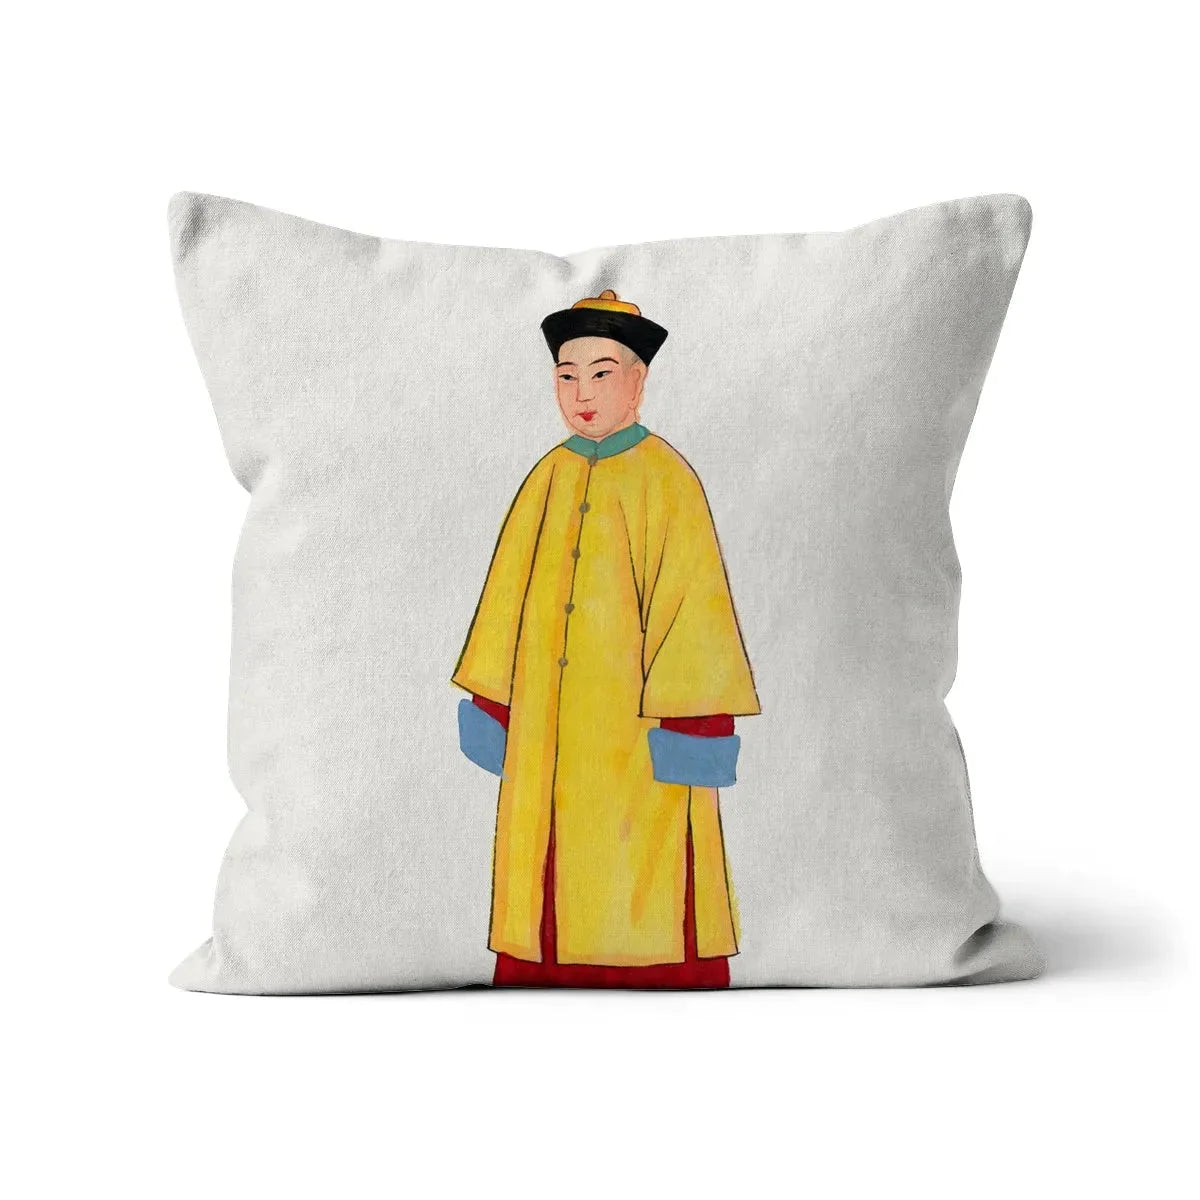 Chinese Priest In Yellow Robes Cushion - Linen / 16’x16’ - Throw Pillows - Aesthetic Art